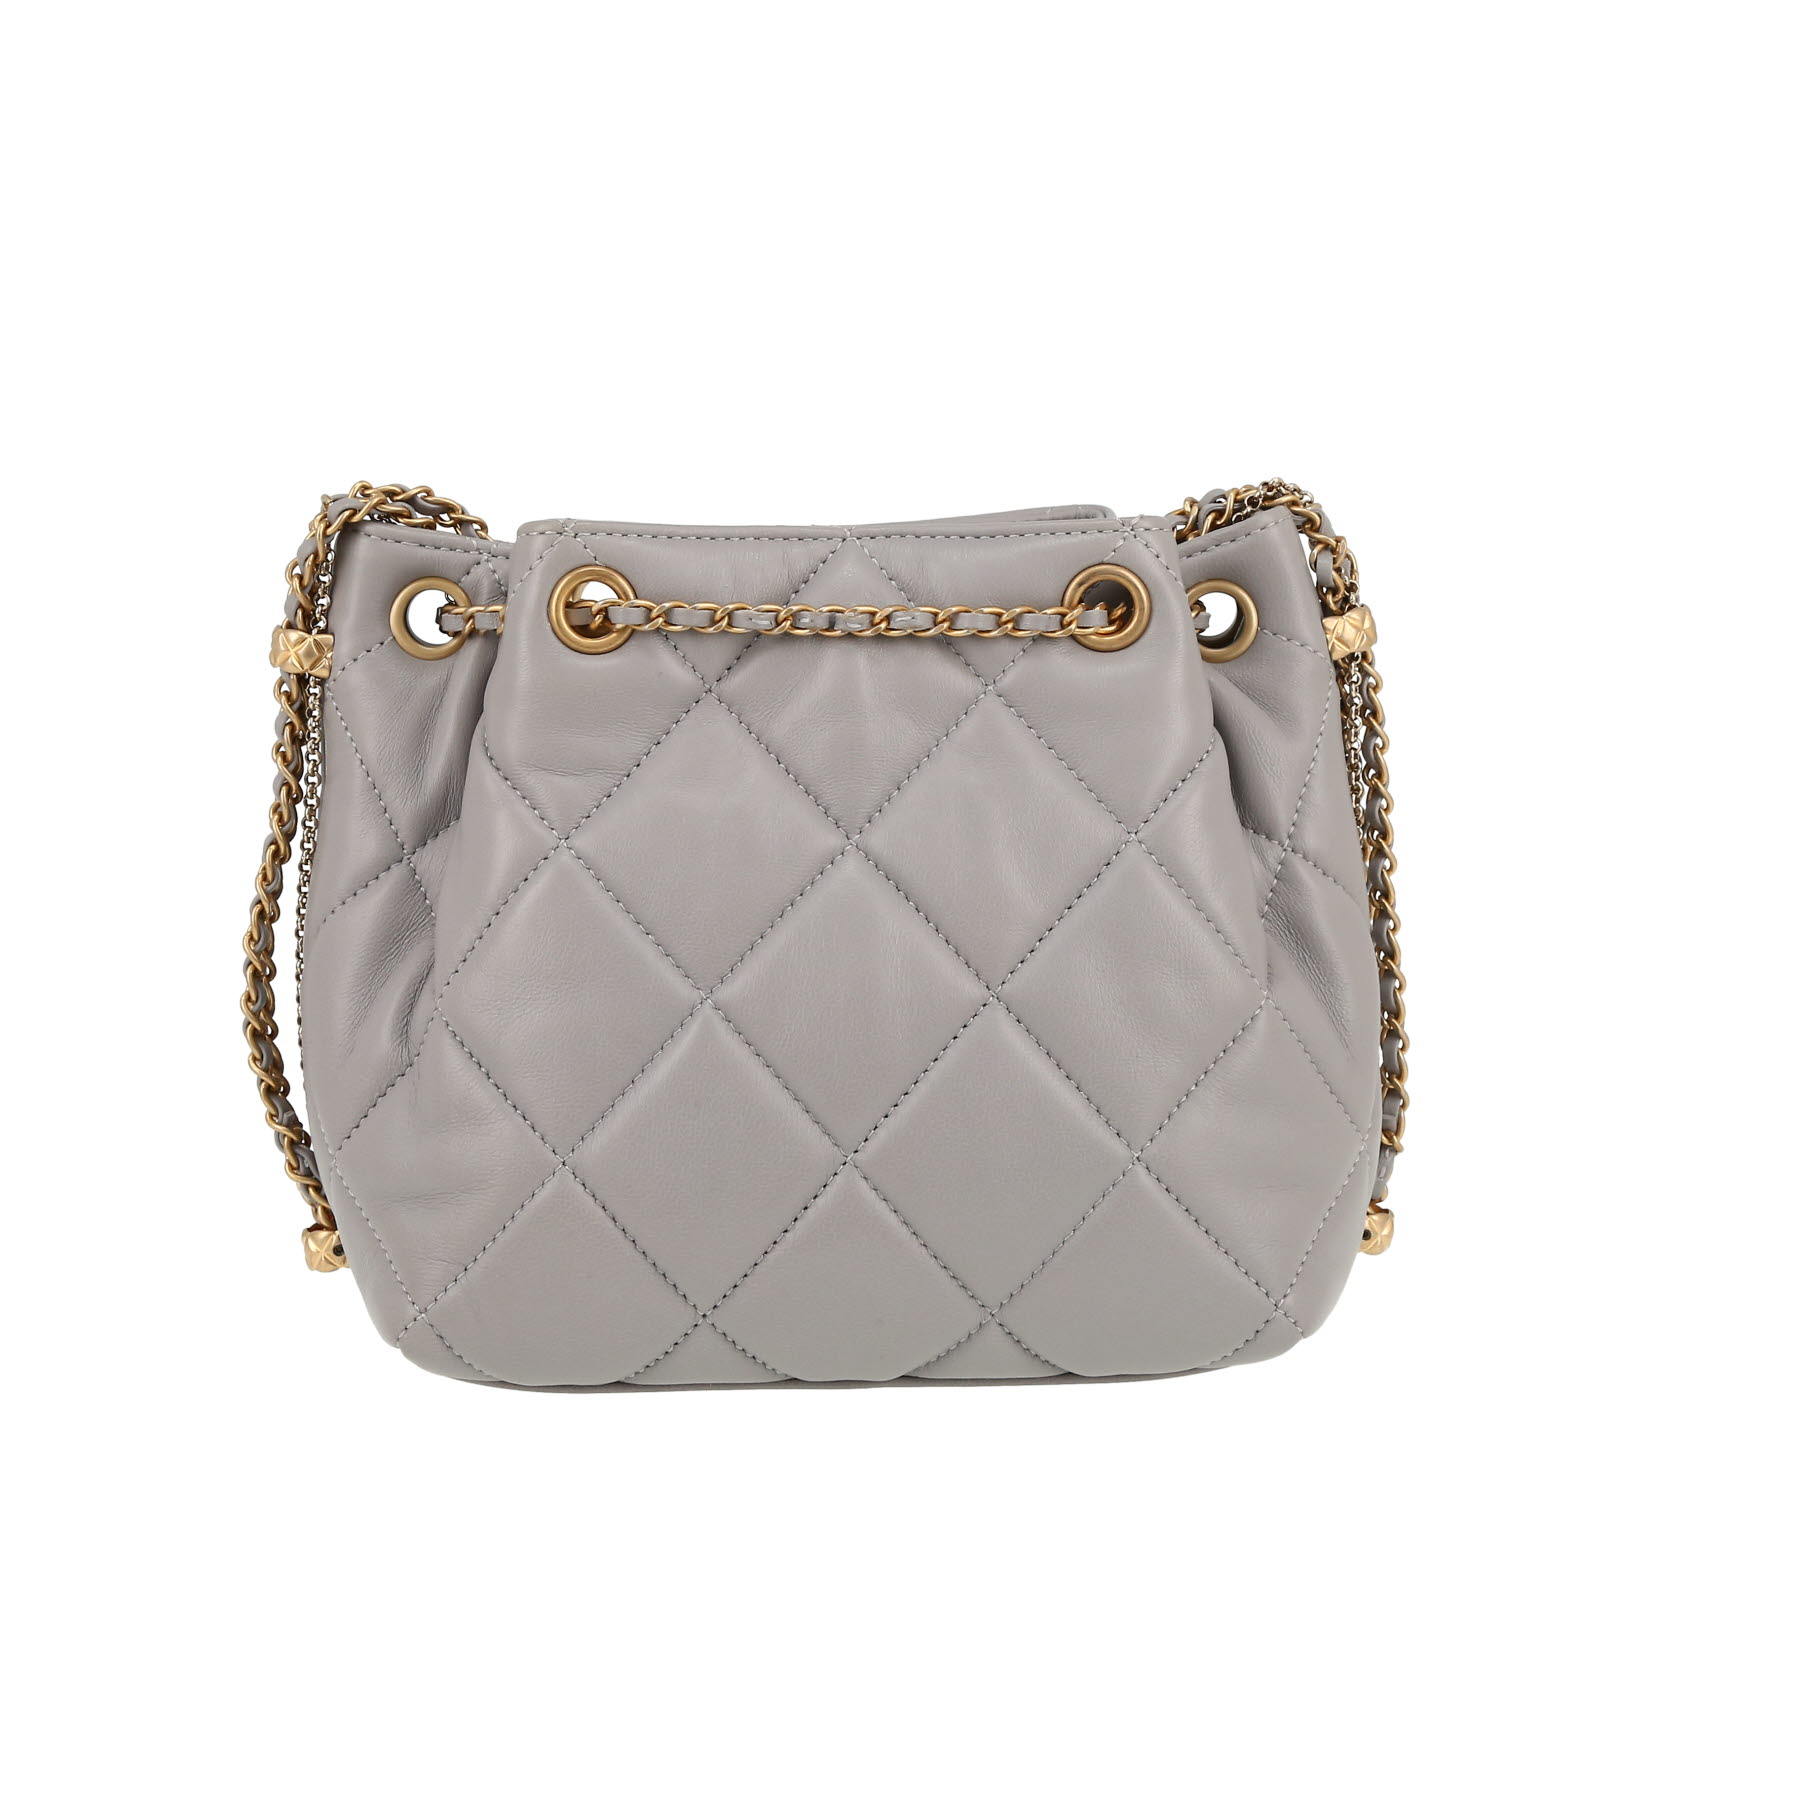 Seau Small Size Handbag In Grey Quilted Leather